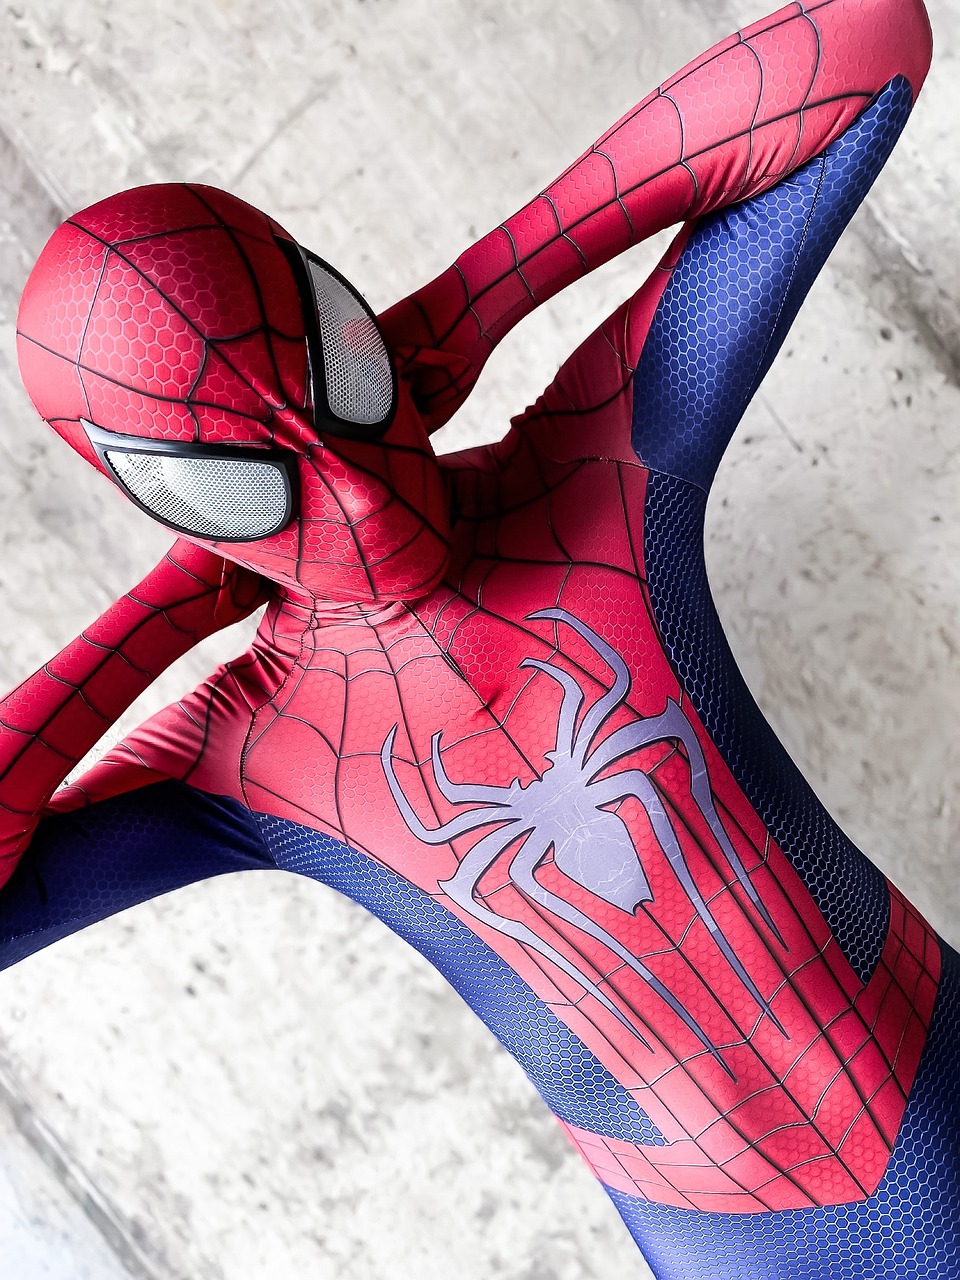 5 Reasons to Buy the Amazing Spider man Suit For Your Kids!